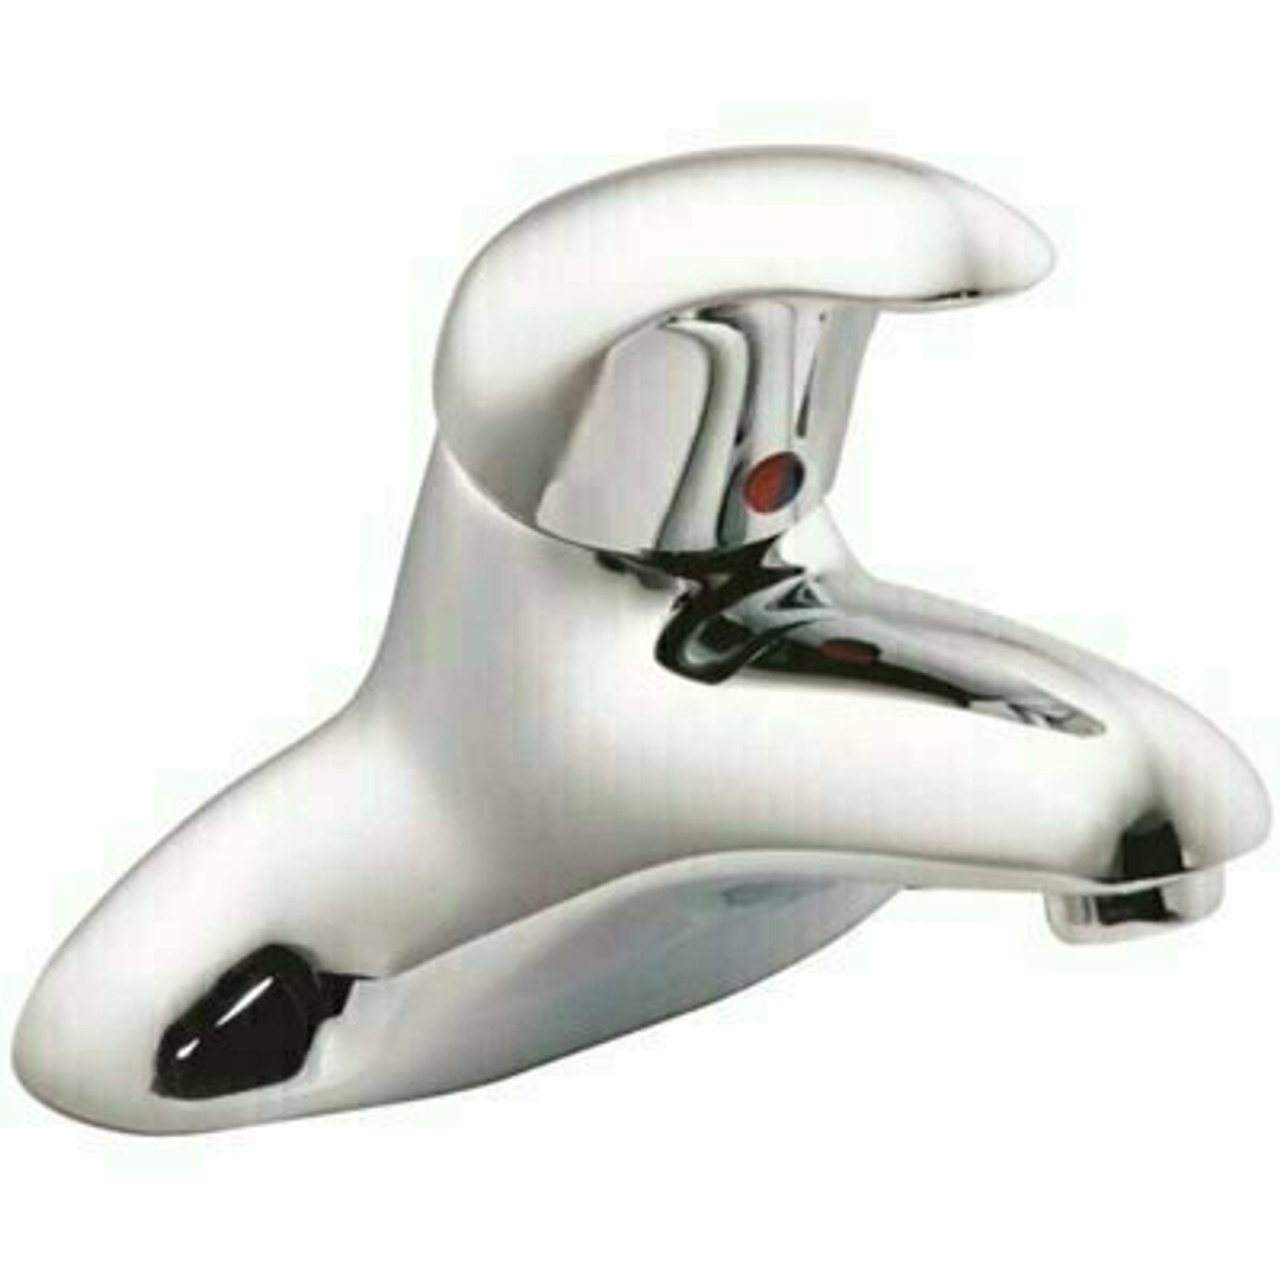 Moen Commercial 4 In. Centerset Single-Handle Low-Arc Bathroom Faucet In Chrome - 202998771